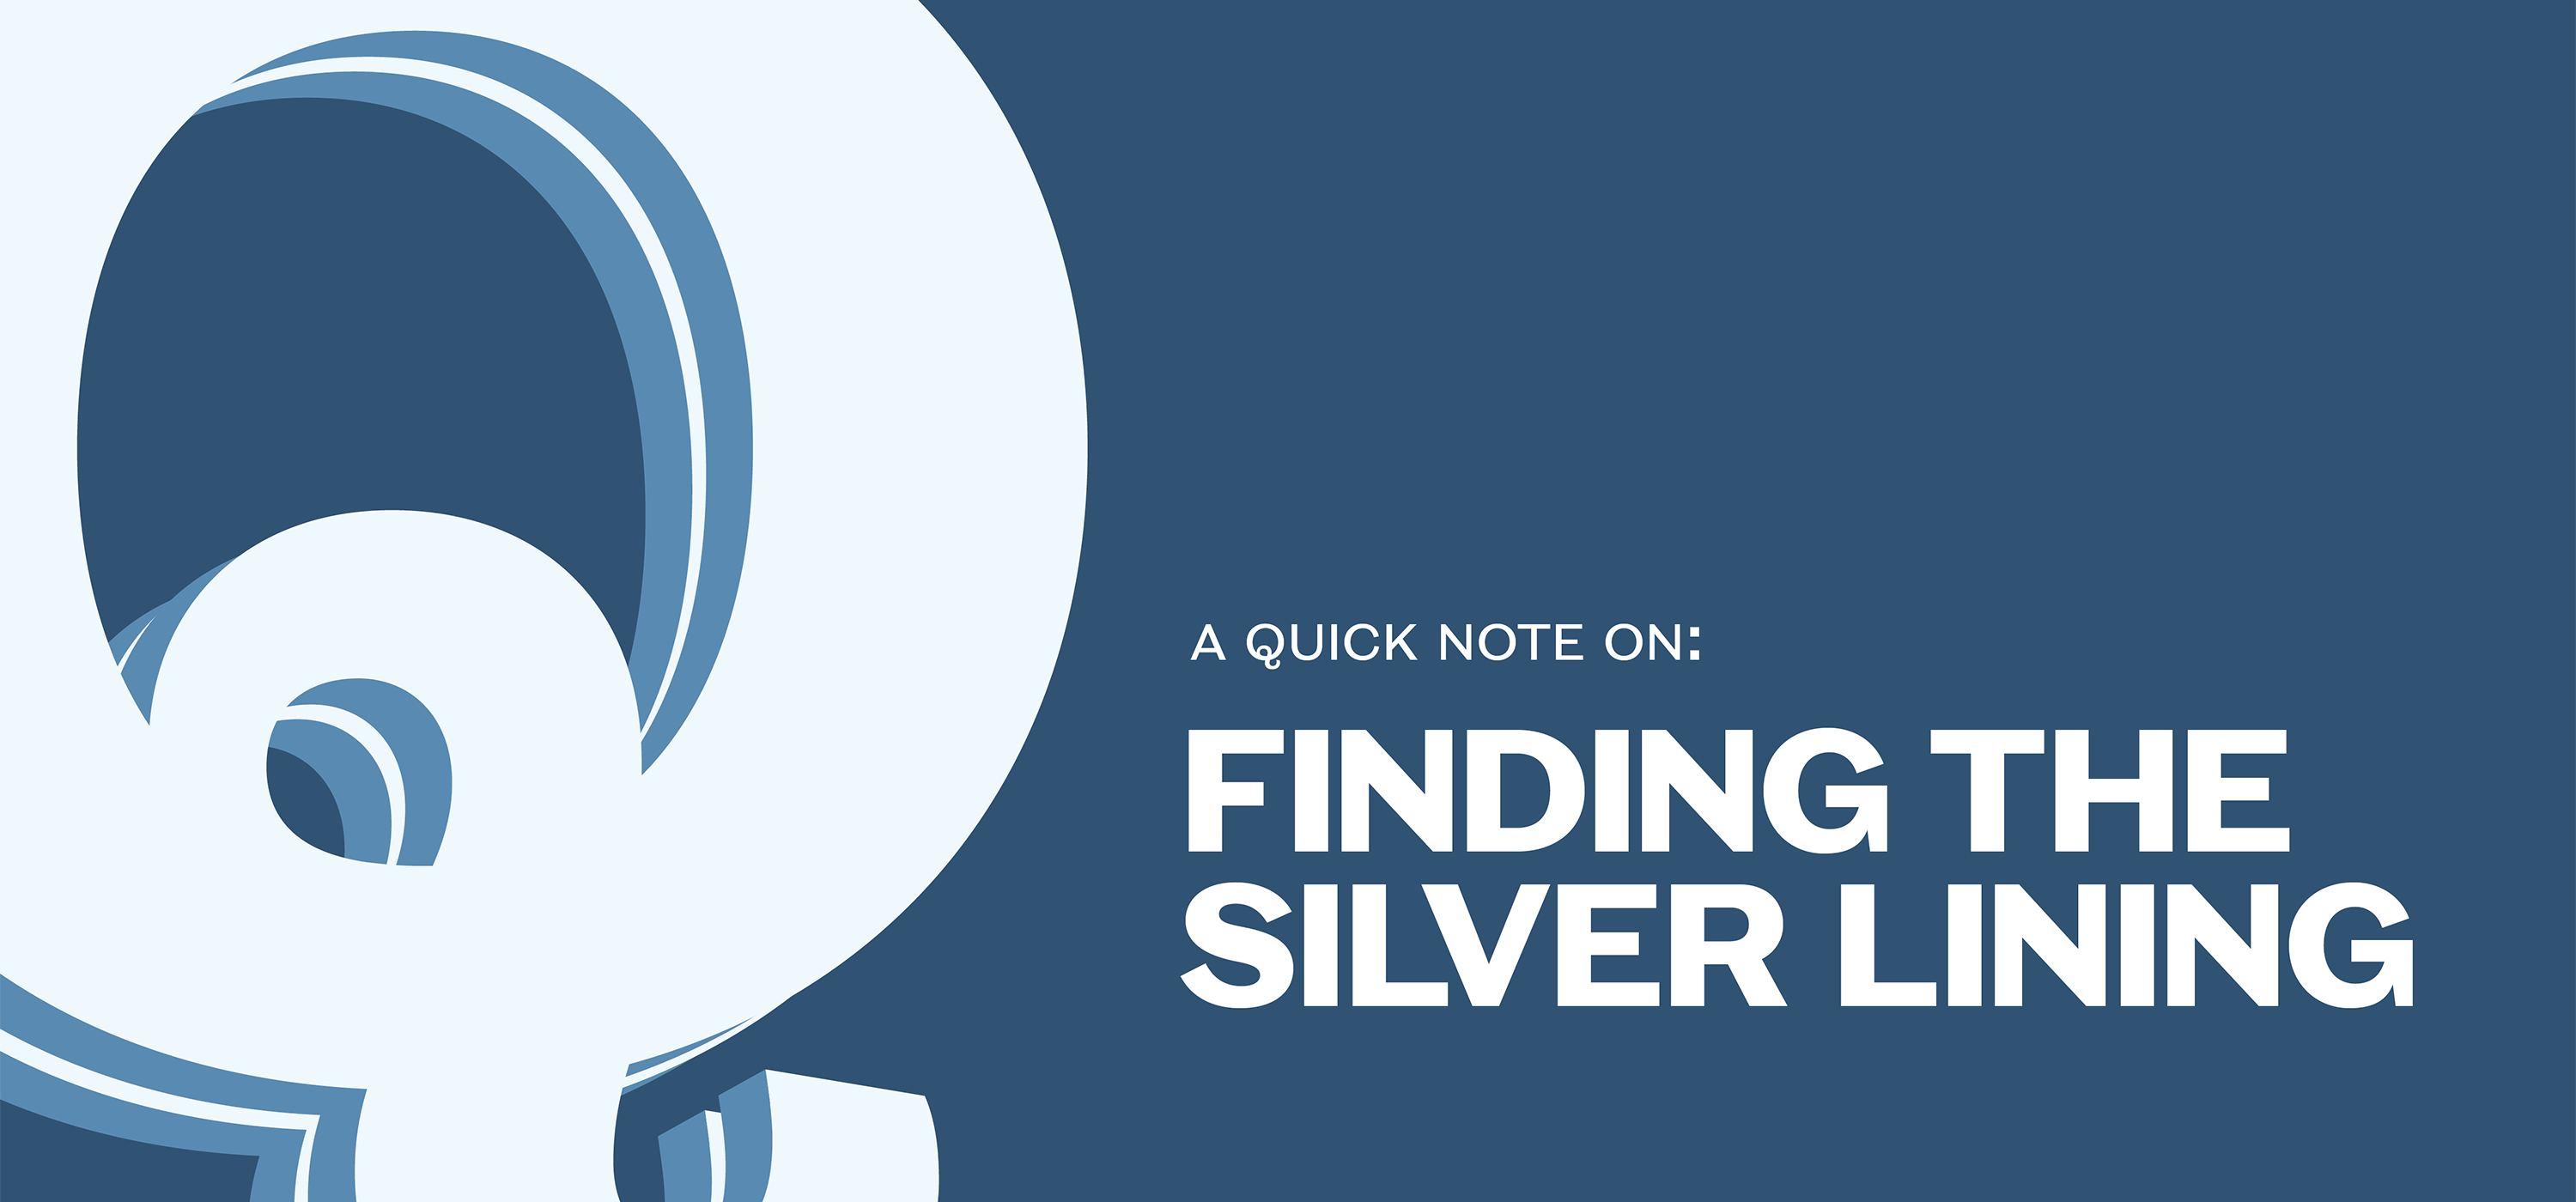 QuickNote_FindingtheSilverLining